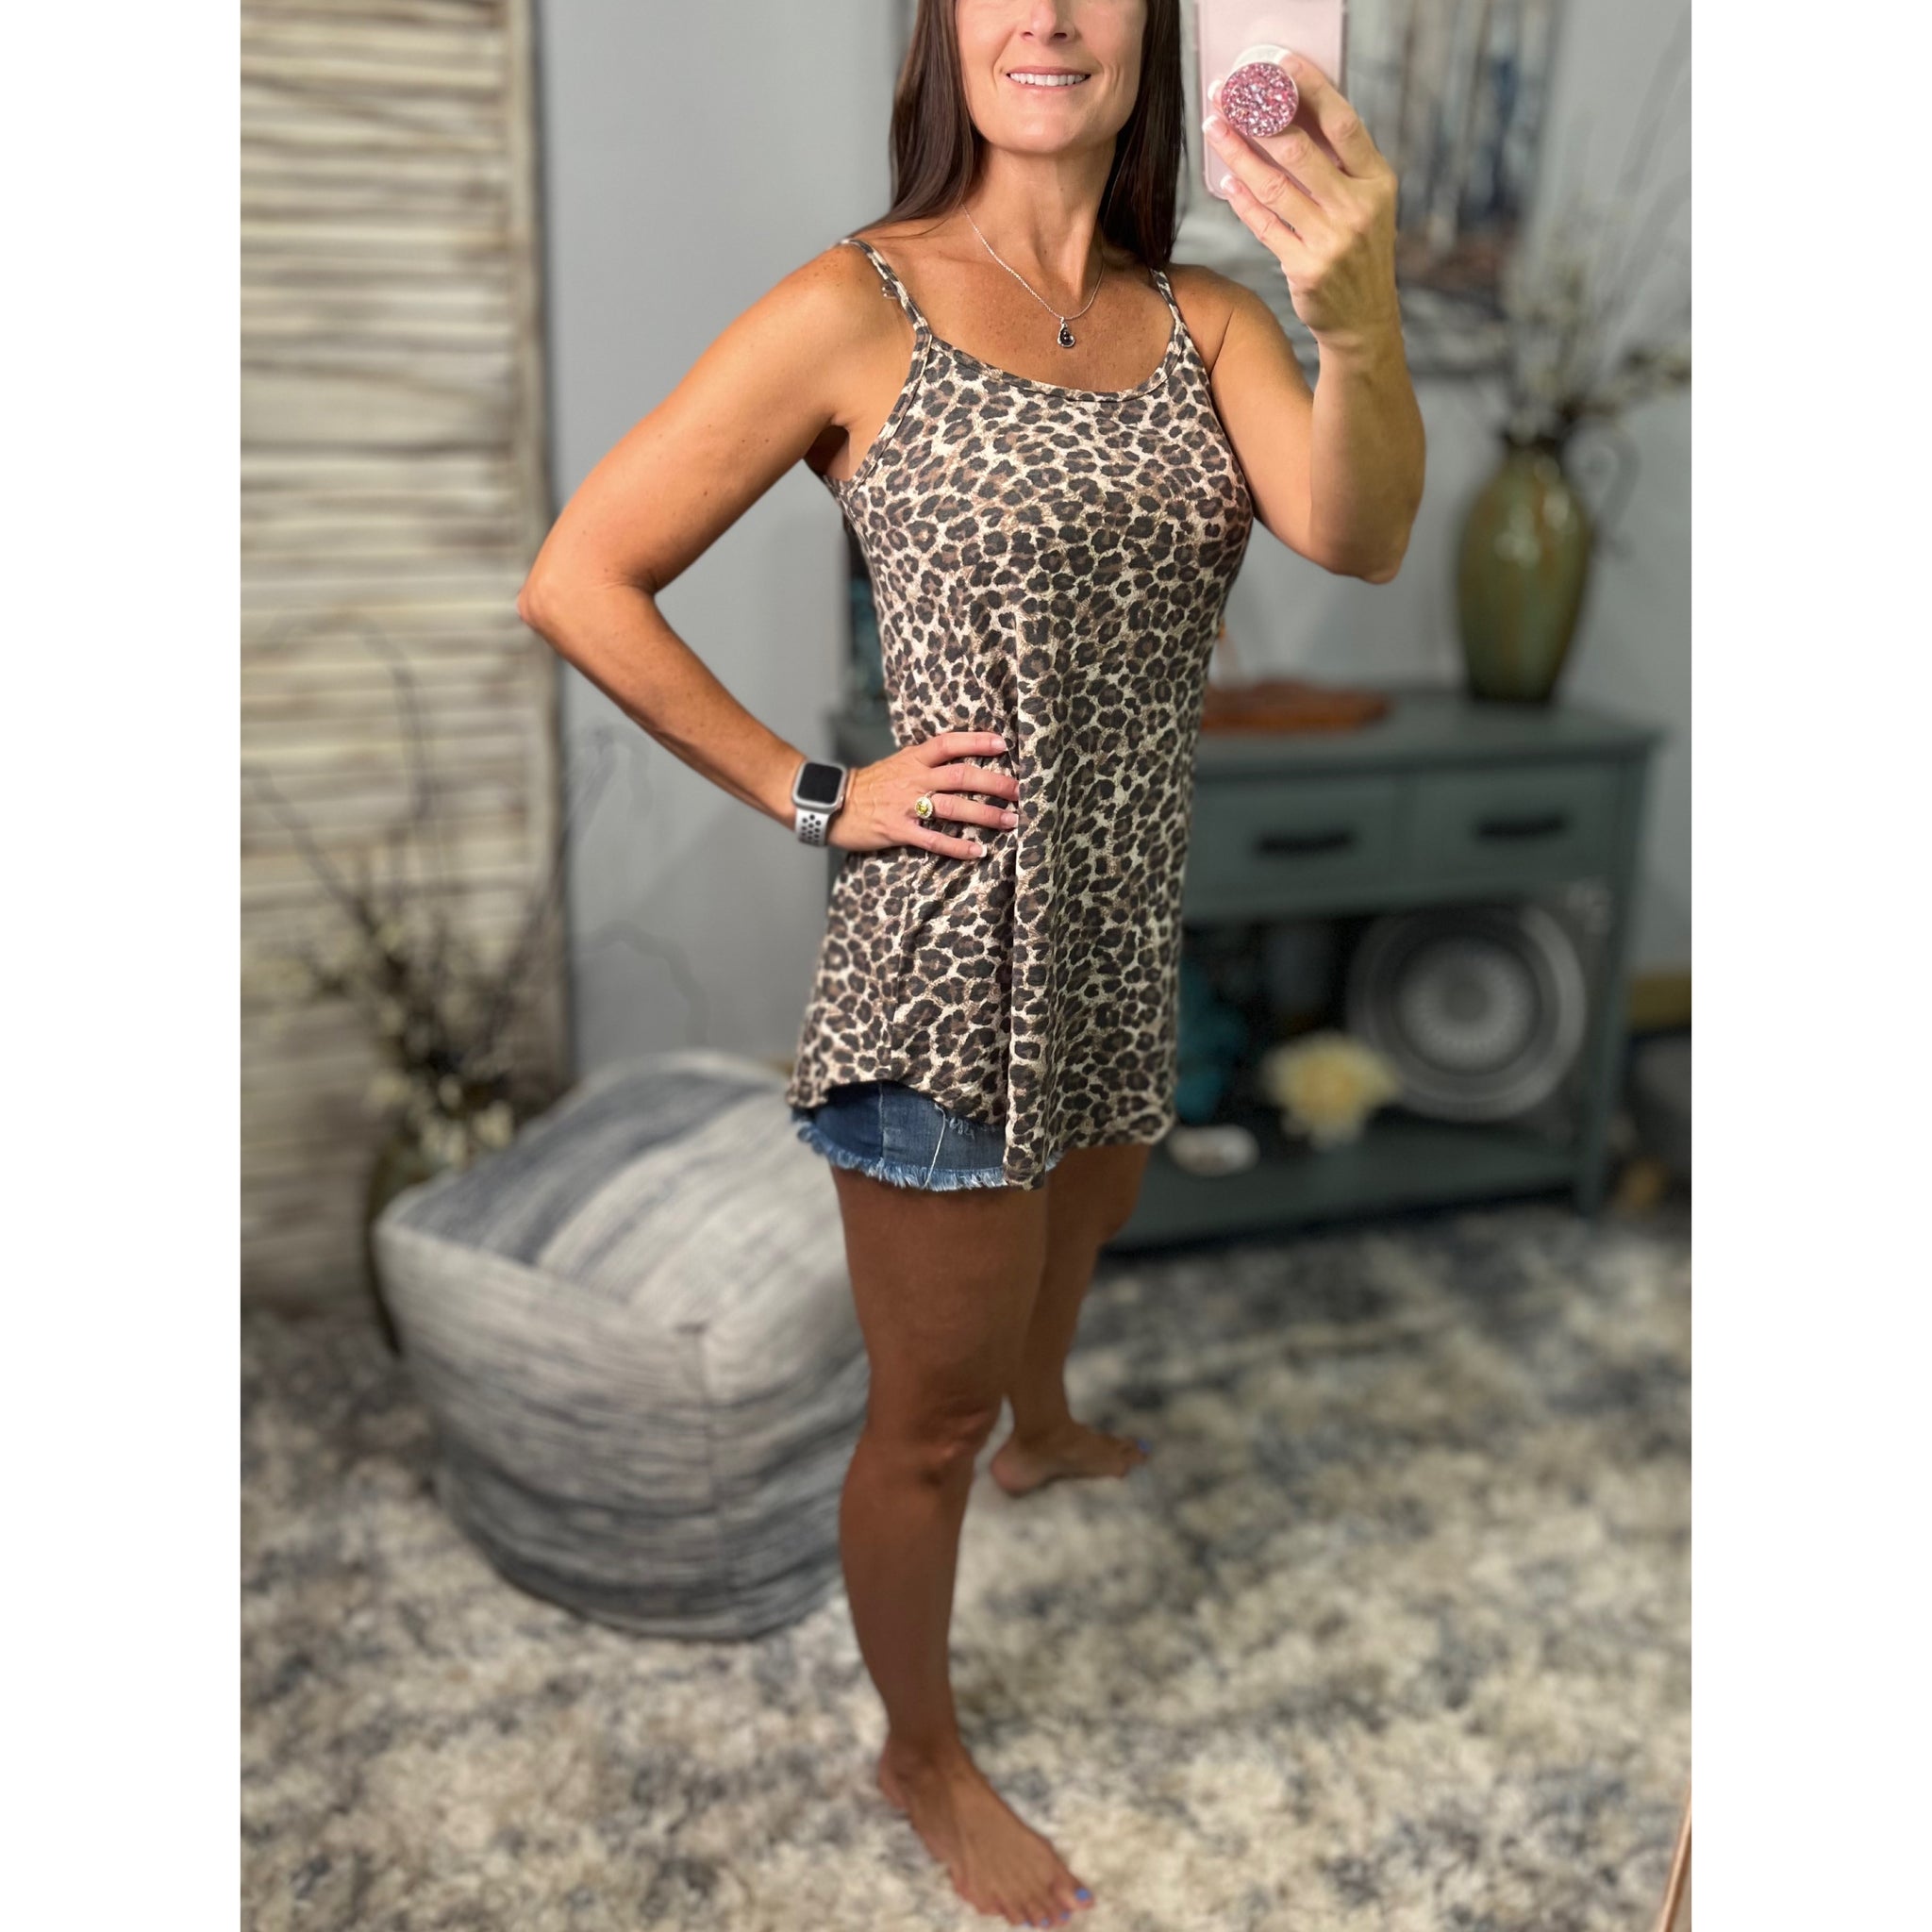 “Heat Wave” Reversible Leopard Low Scoop Or V-Neck Tank Shirt Top Distressed Brown S/M/L/XL